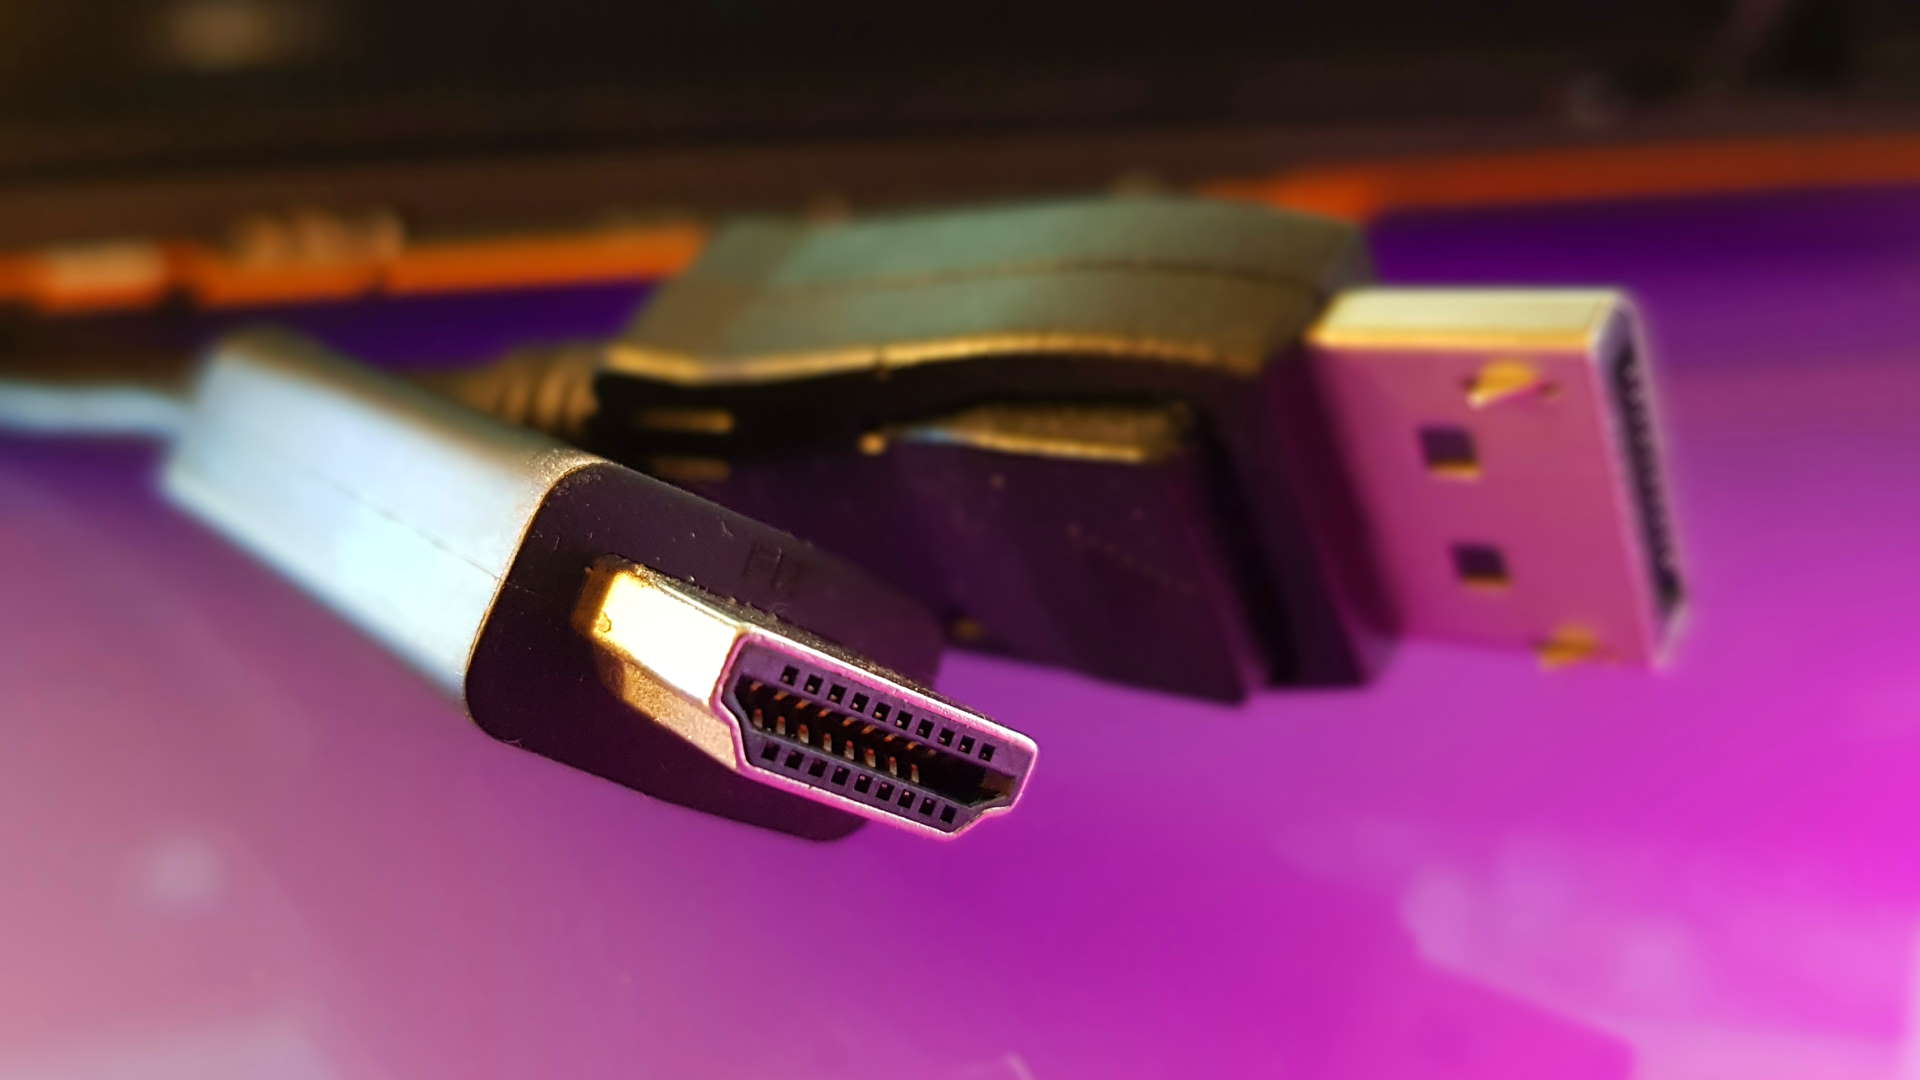  HDMI 2.1 vs DisplayPort 2.0: What’s the best next-gen video interface for gamers? 